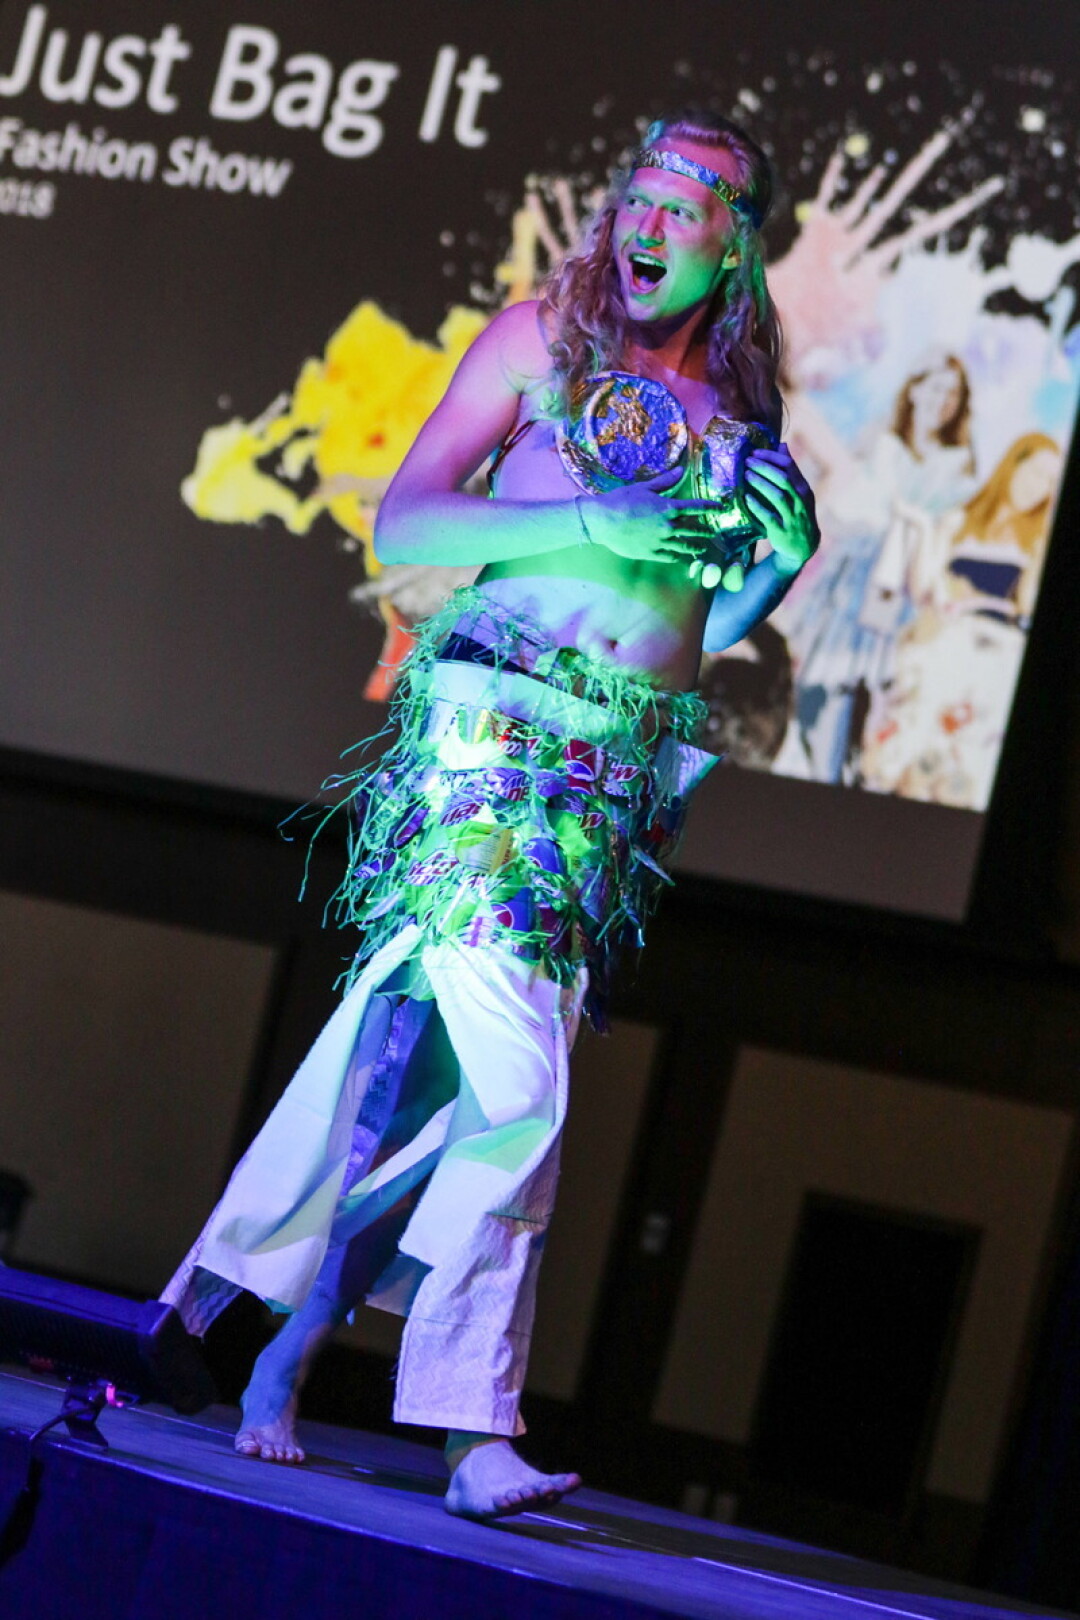 One of the recycled costumes at last year’s Just Bag It Fashion Show